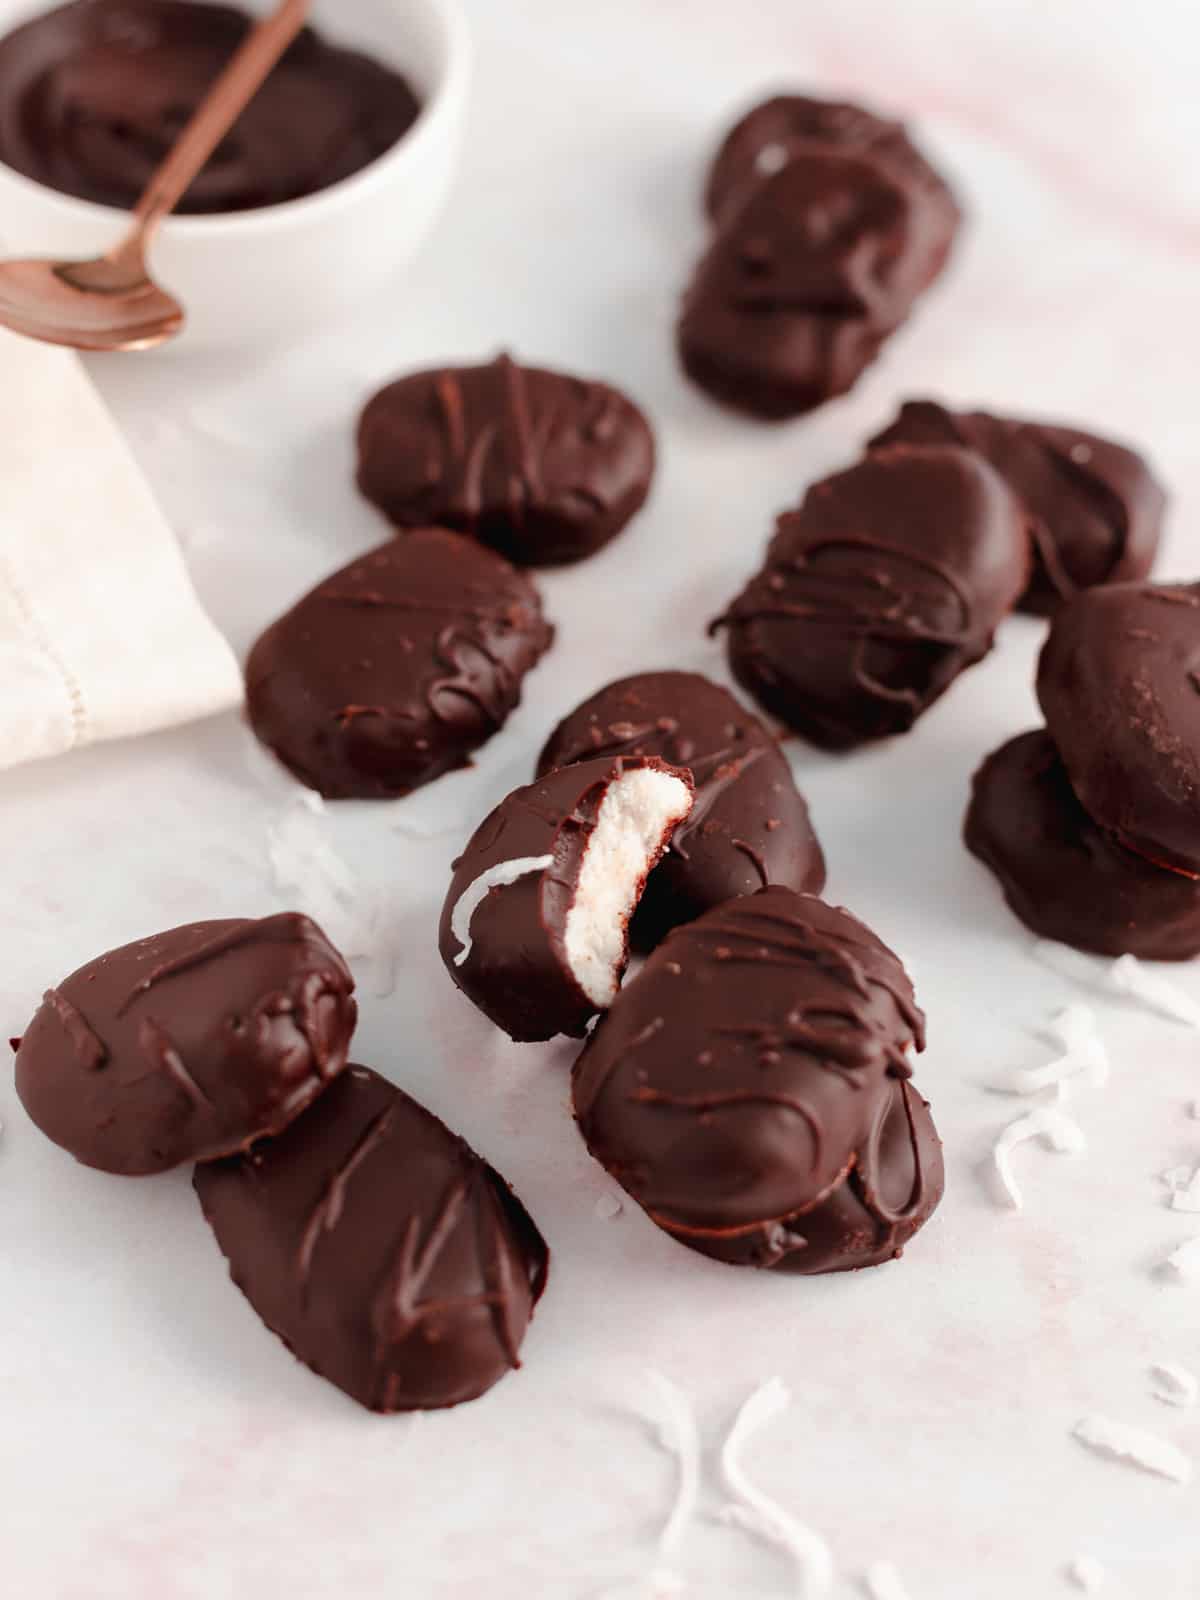 Homemade coconut and chocolate candy on a table